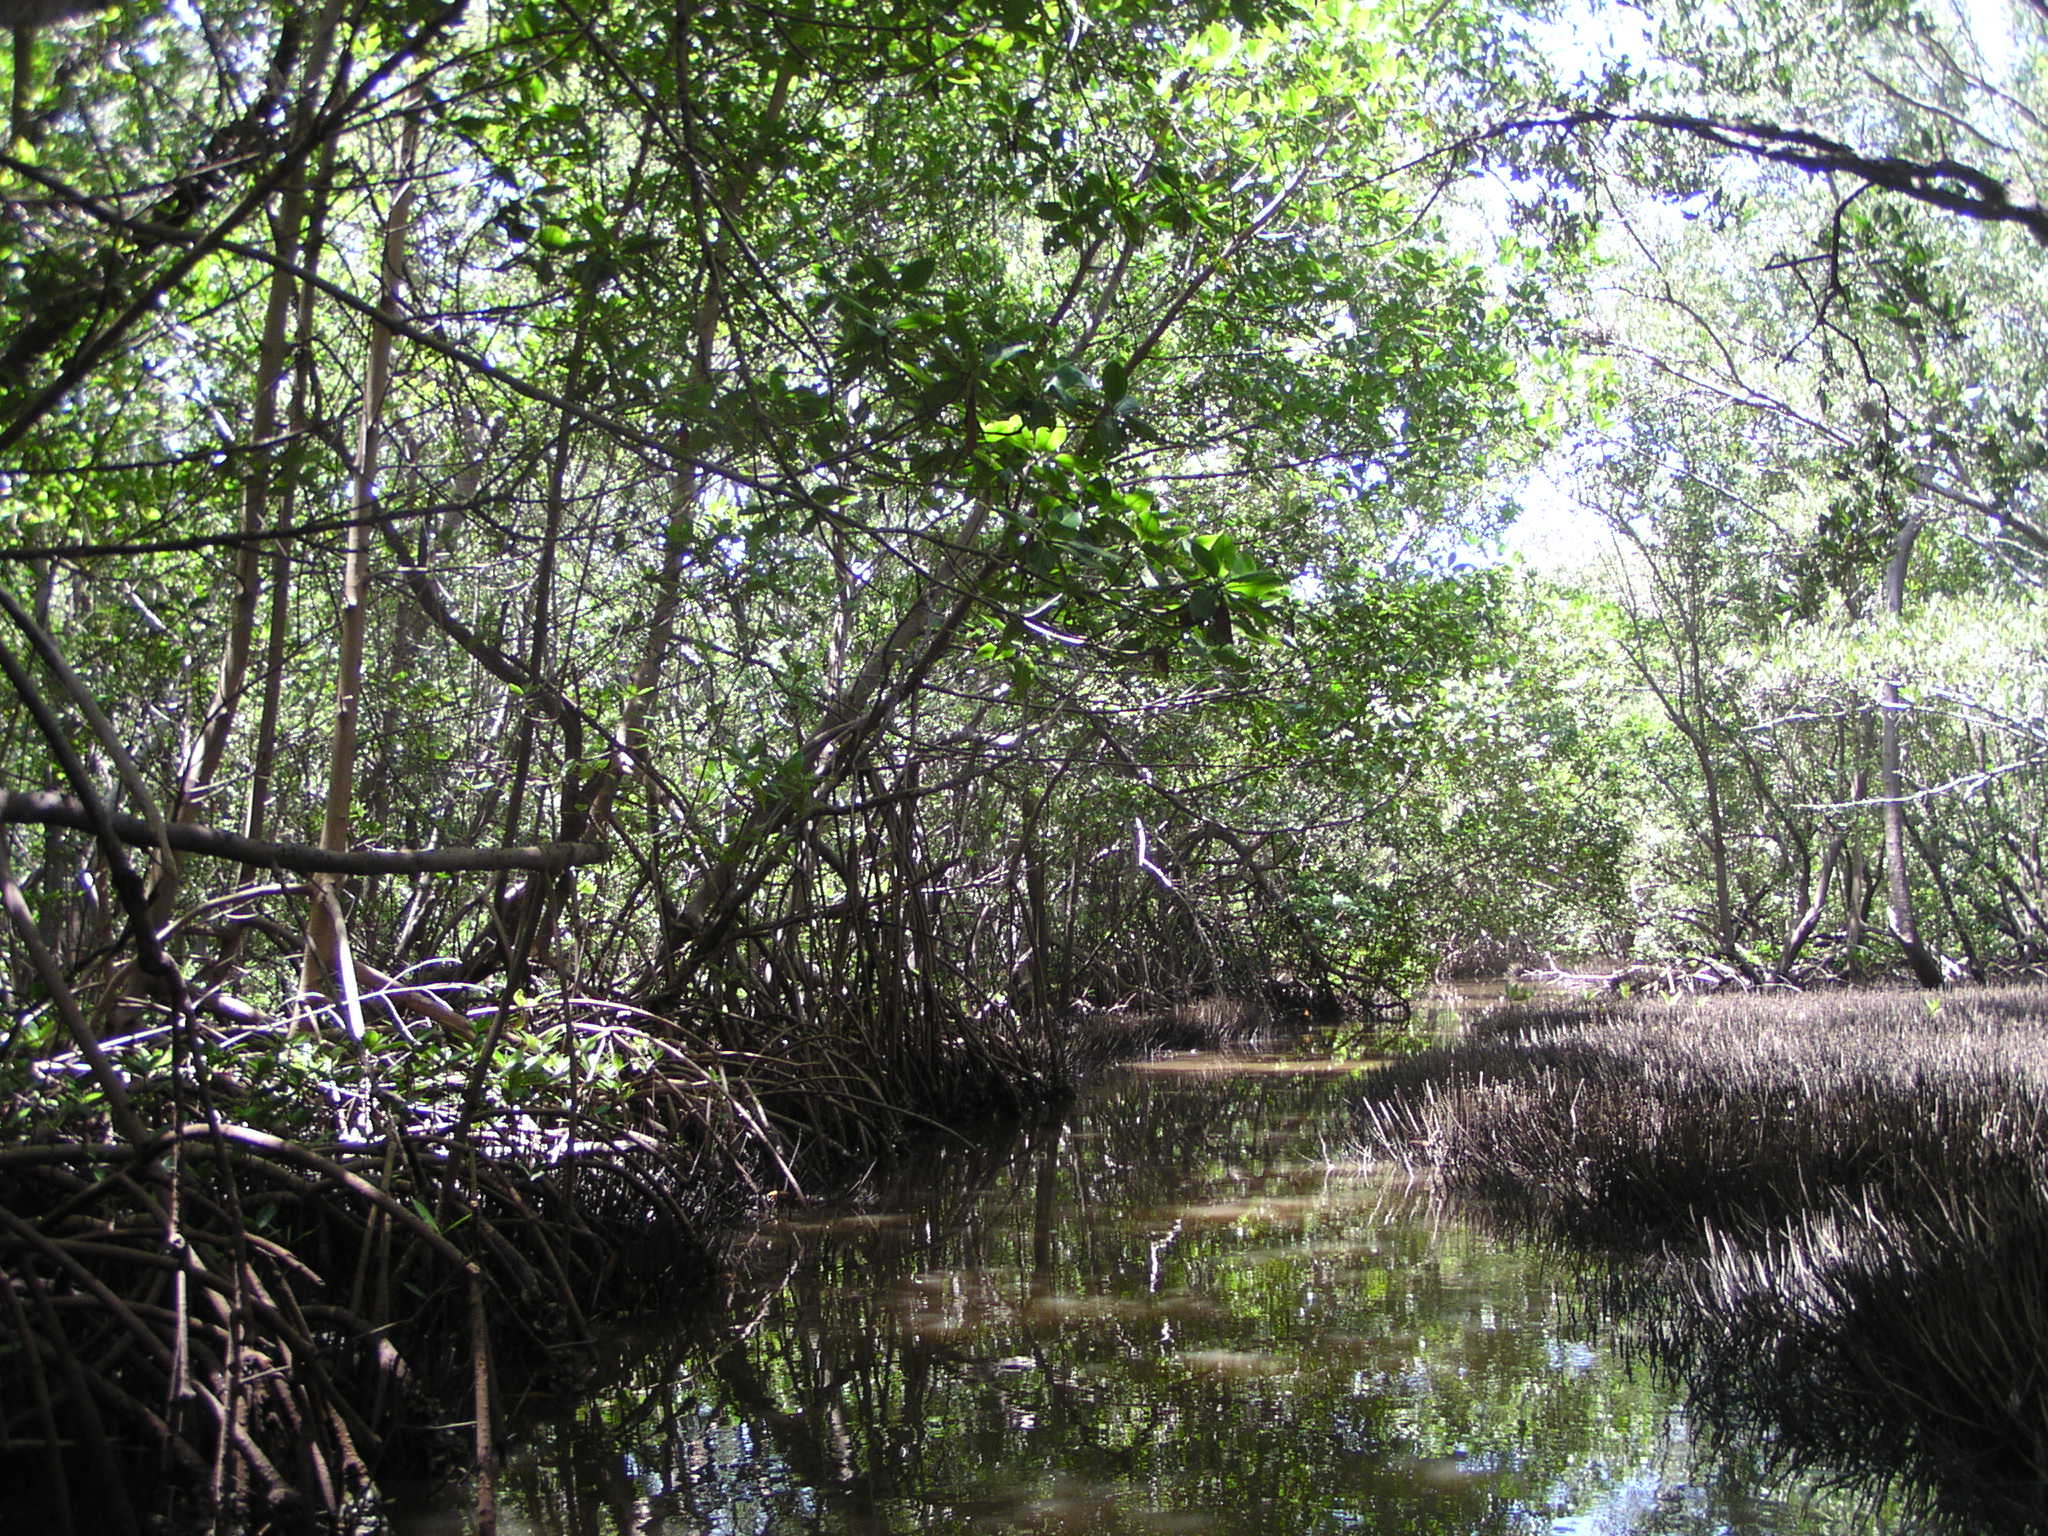 The mangroves are very well cared for